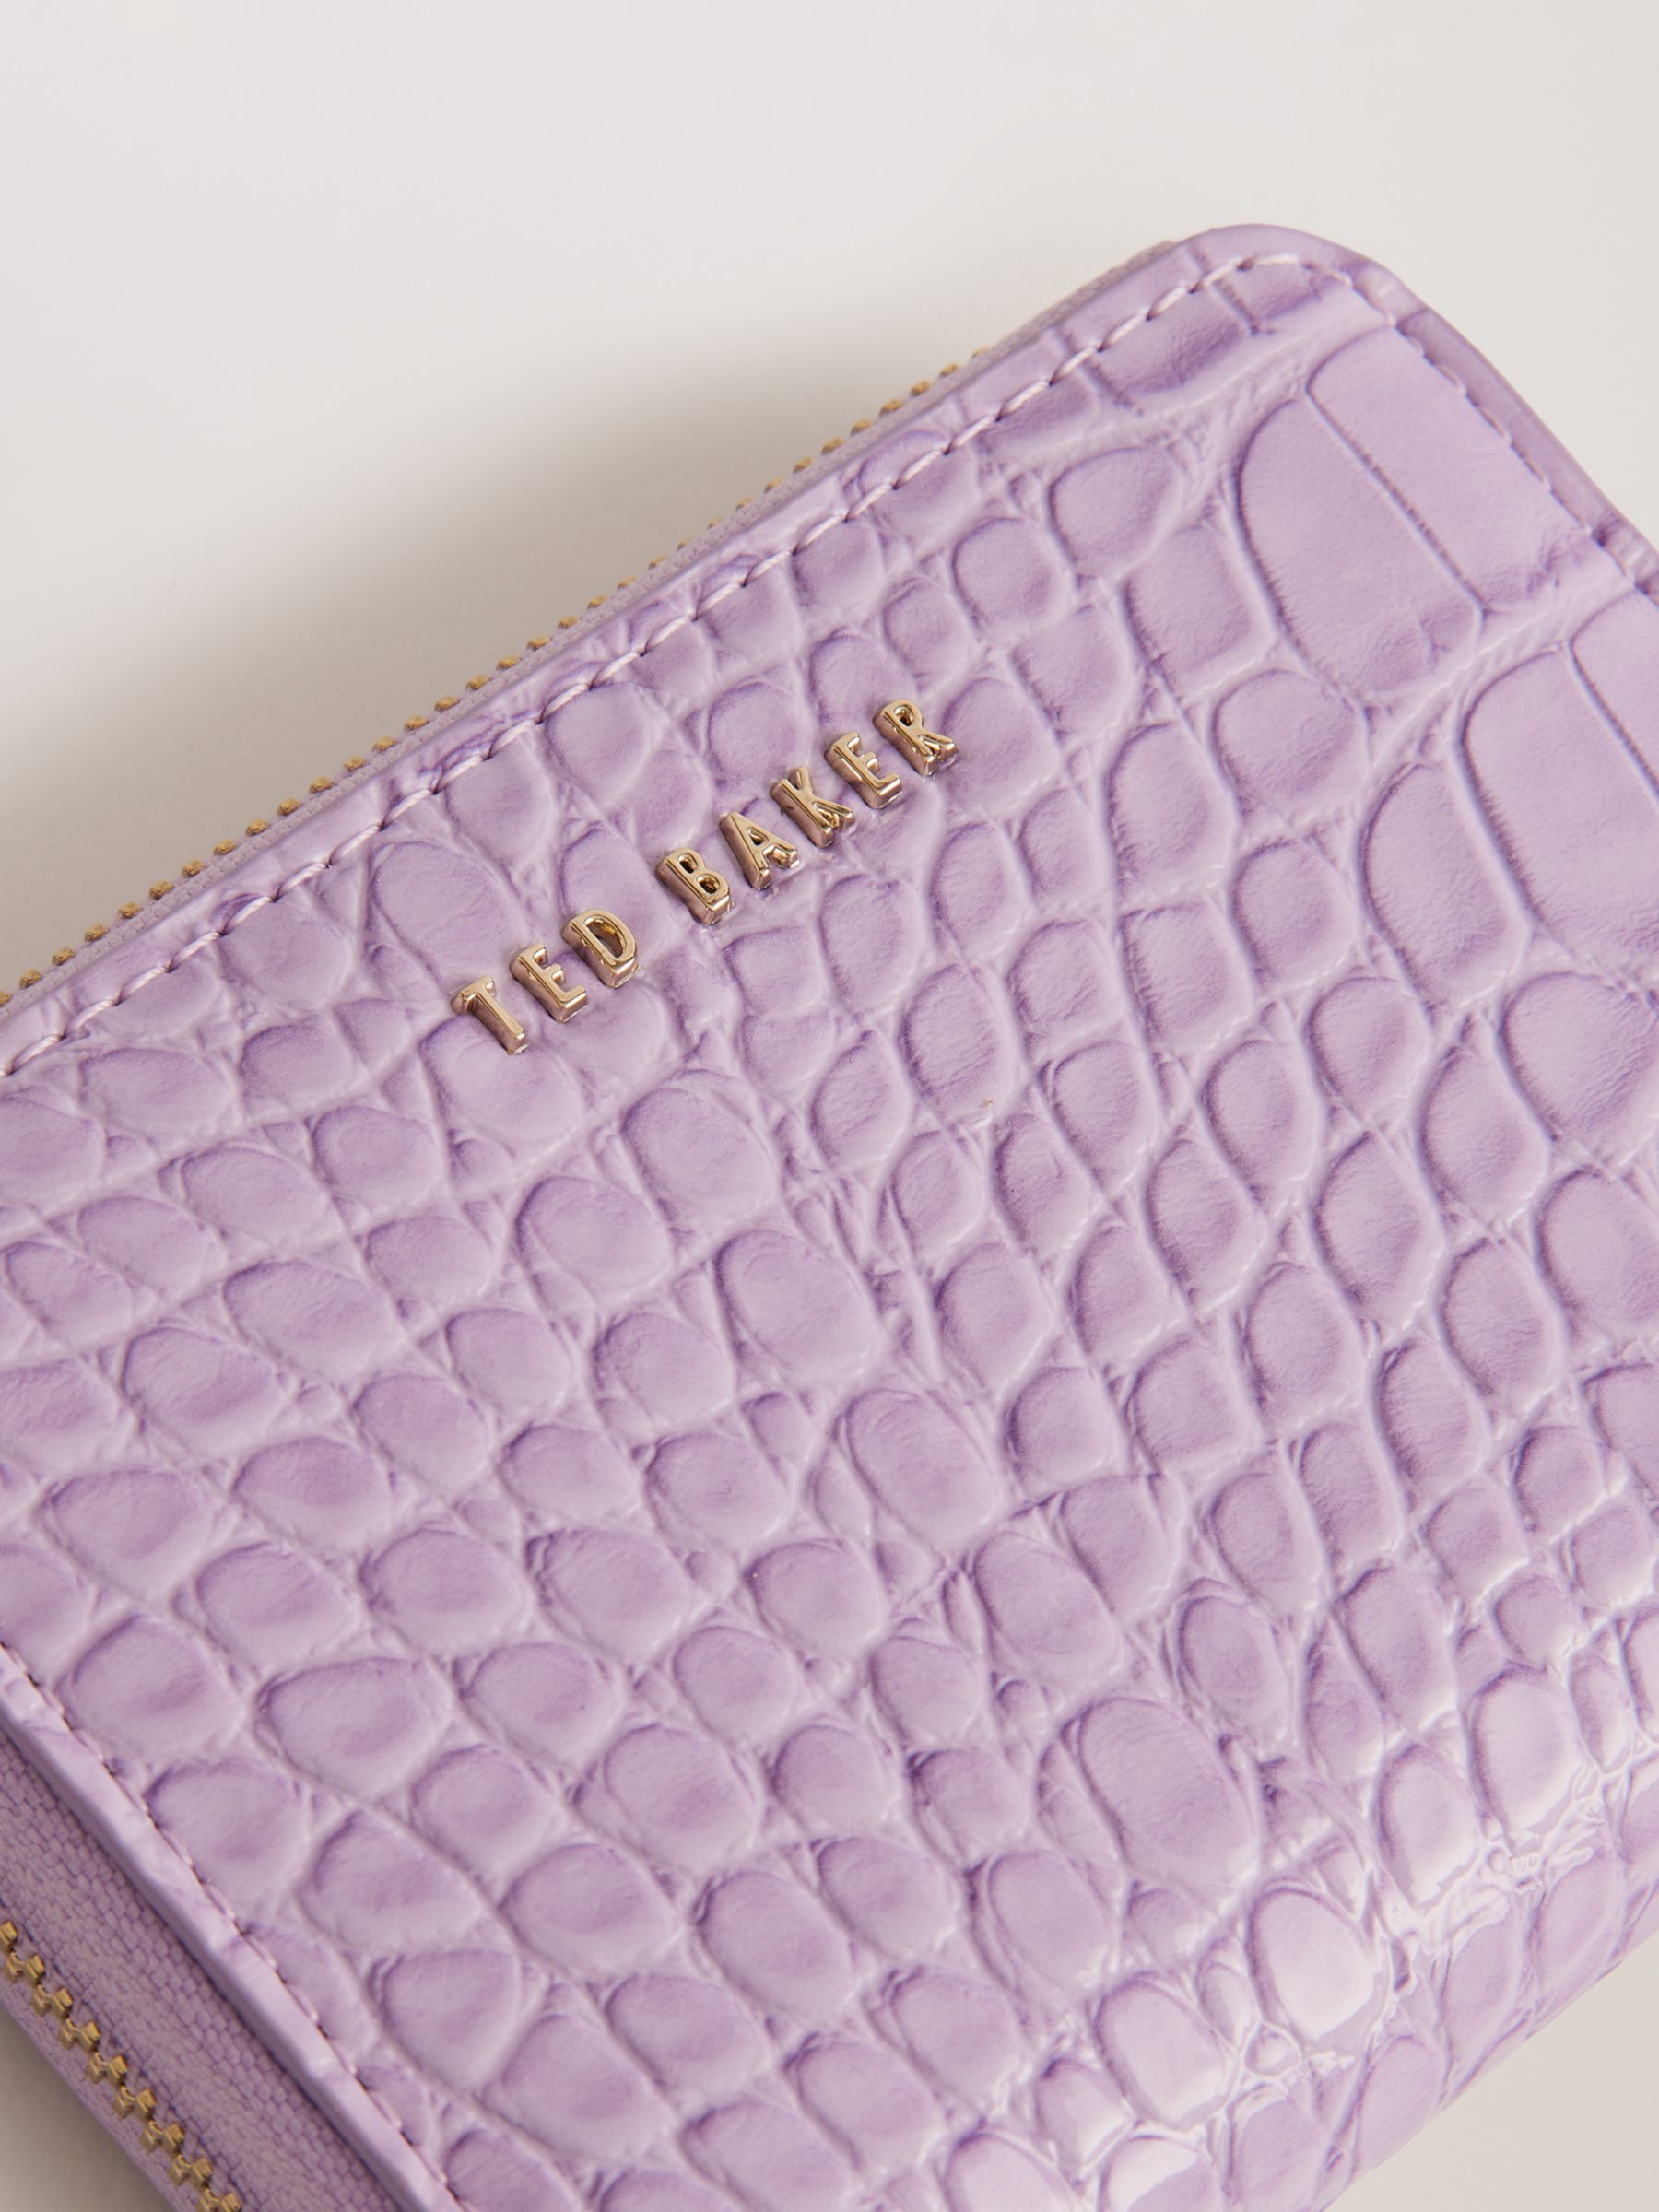 Ted Baker Connii Mini Croc Effect Purse, Lilac, One Size